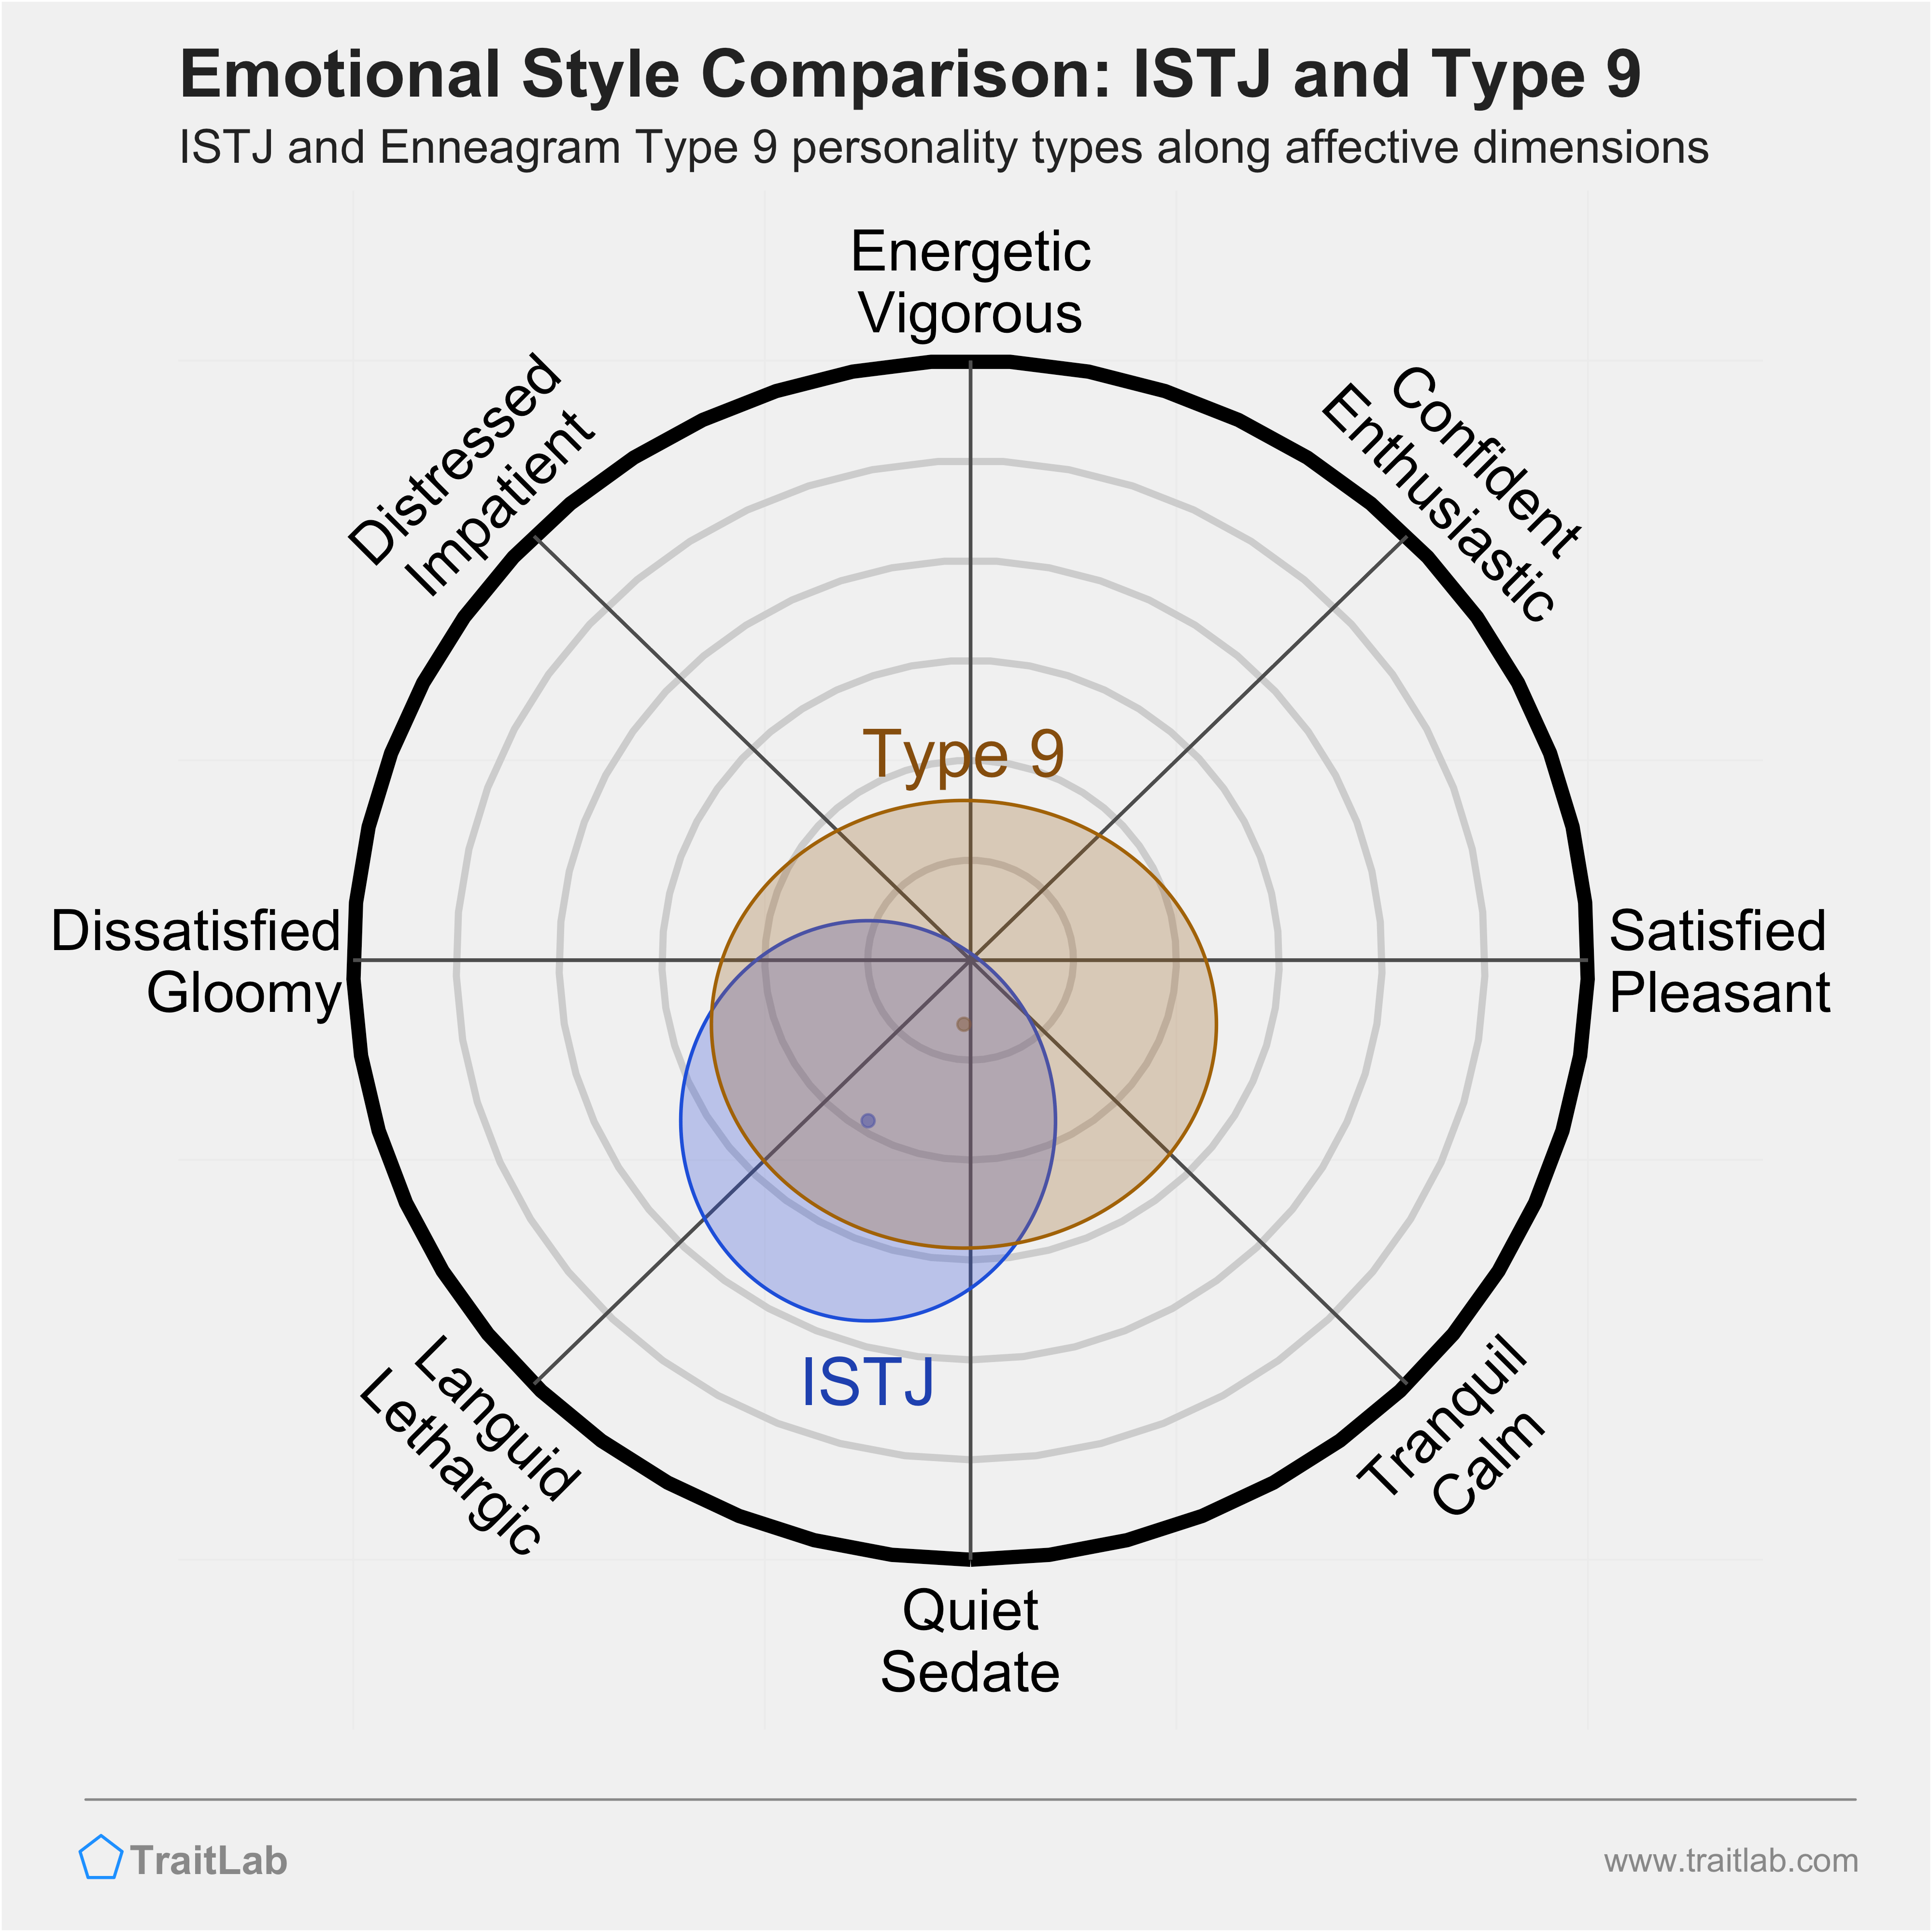 ISTJ and Type 9 comparison across emotional (affective) dimensions